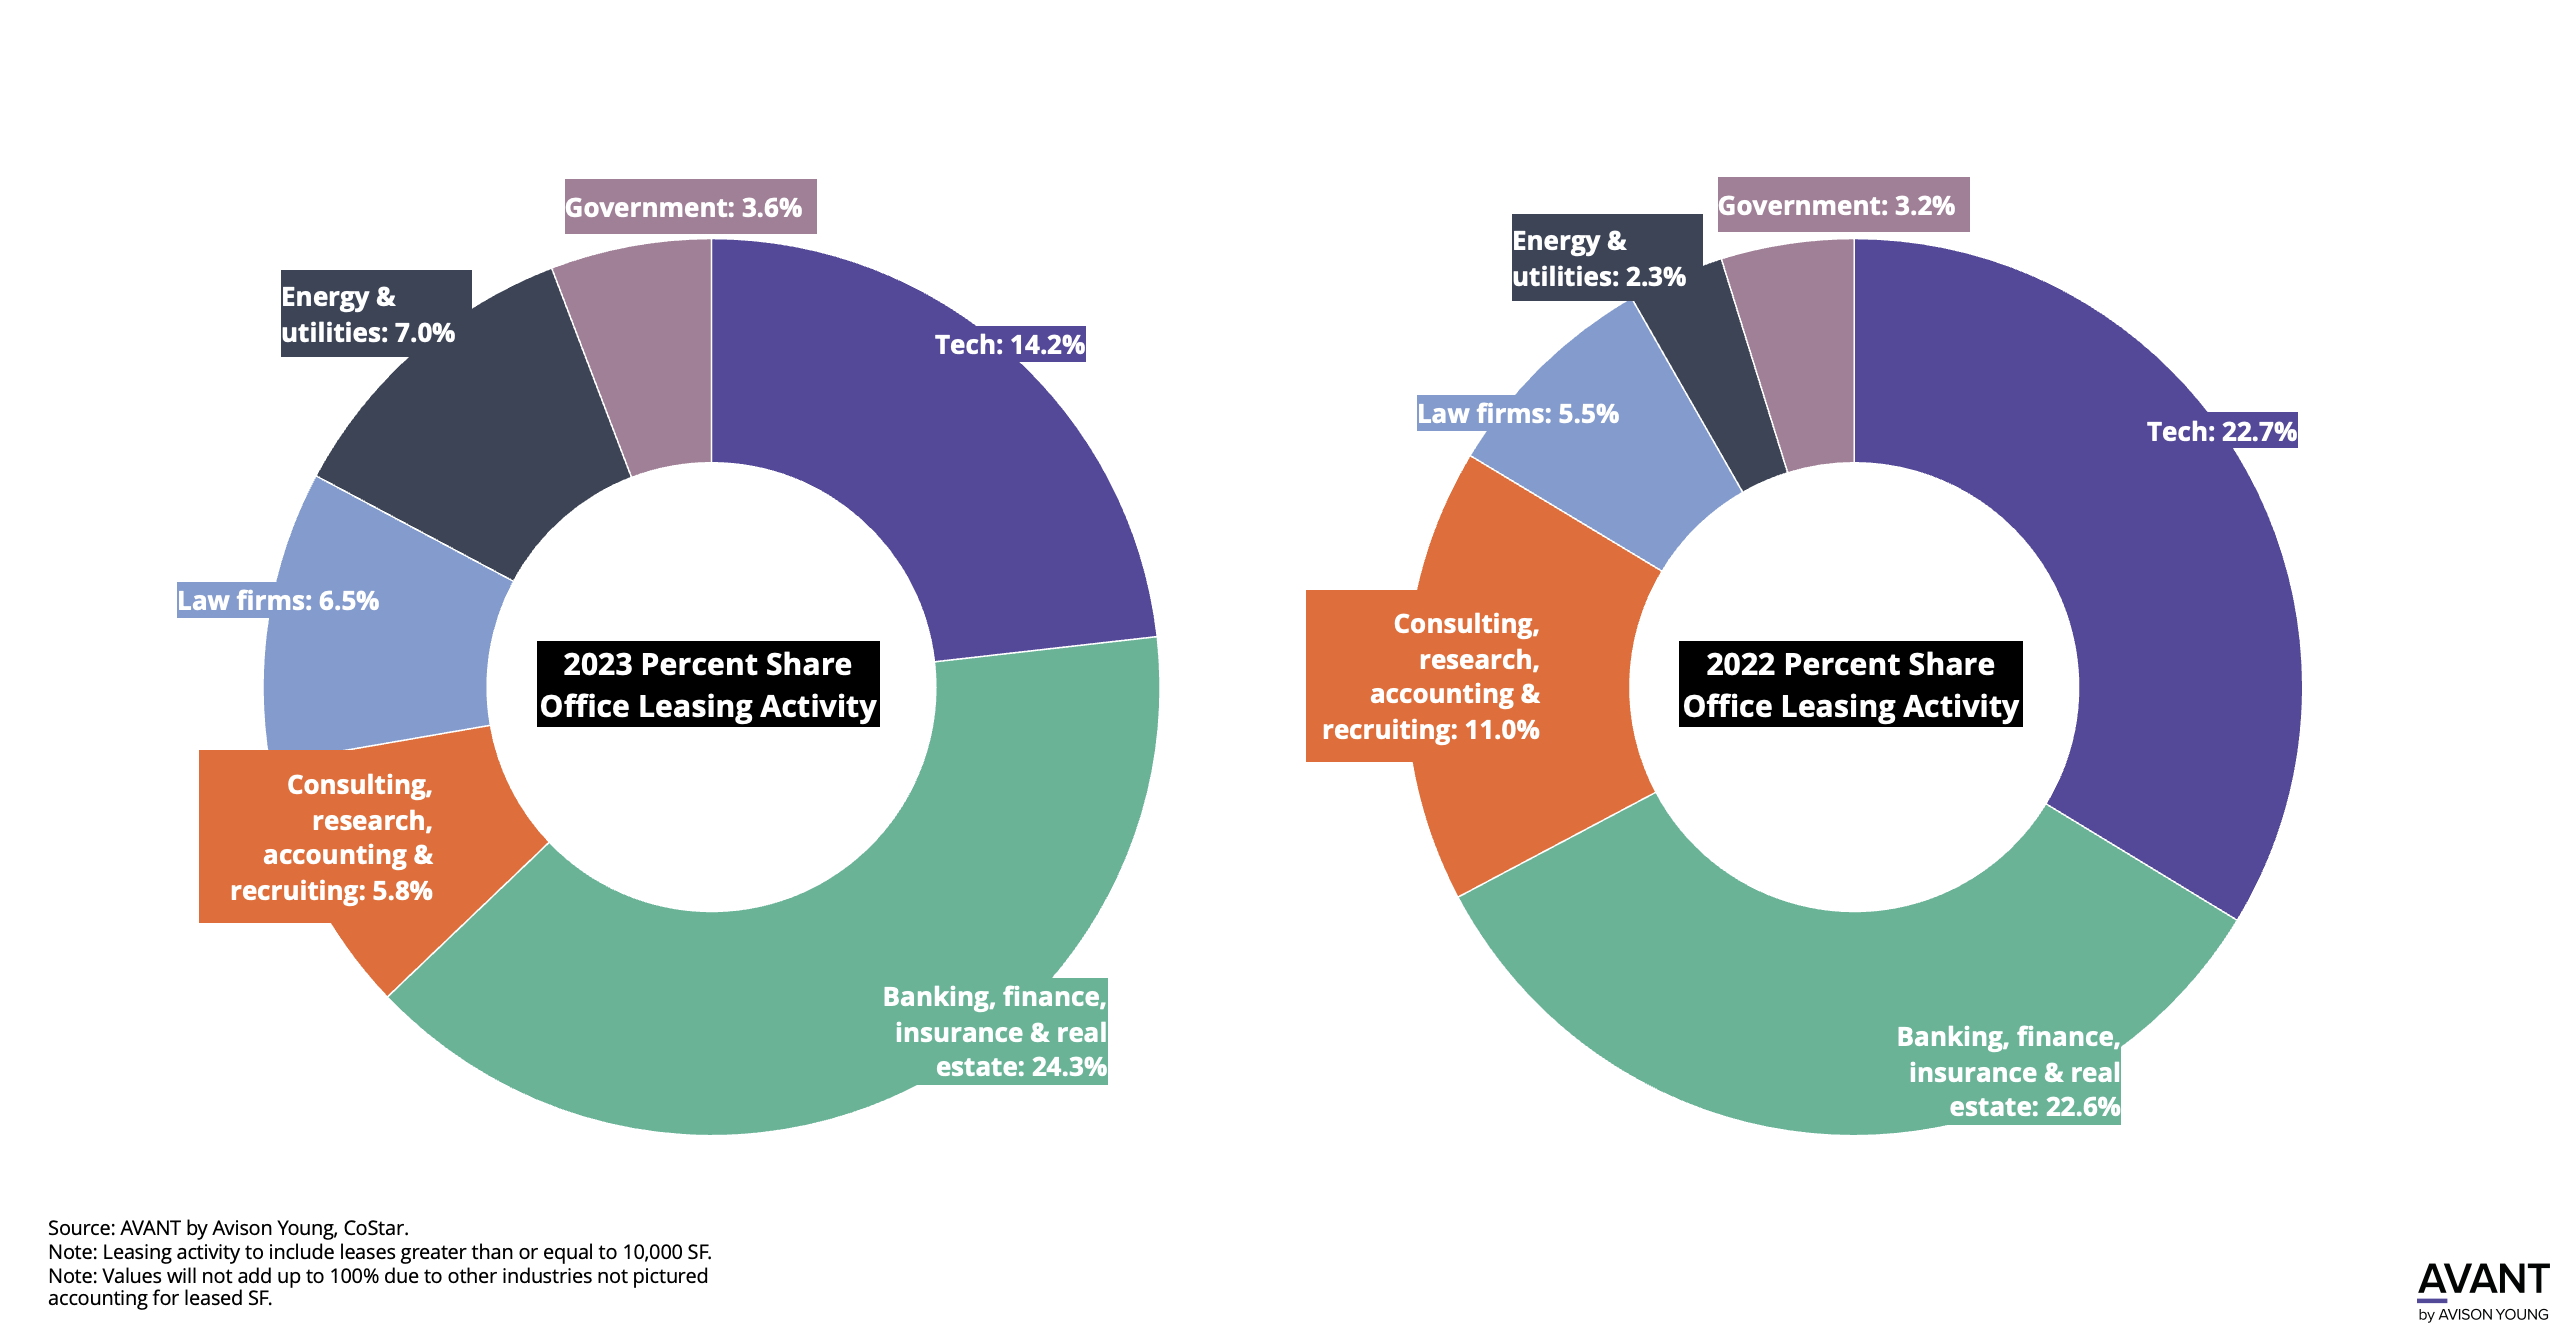 Pie charts depicting the change in office leasing activity from 2022 to 2023